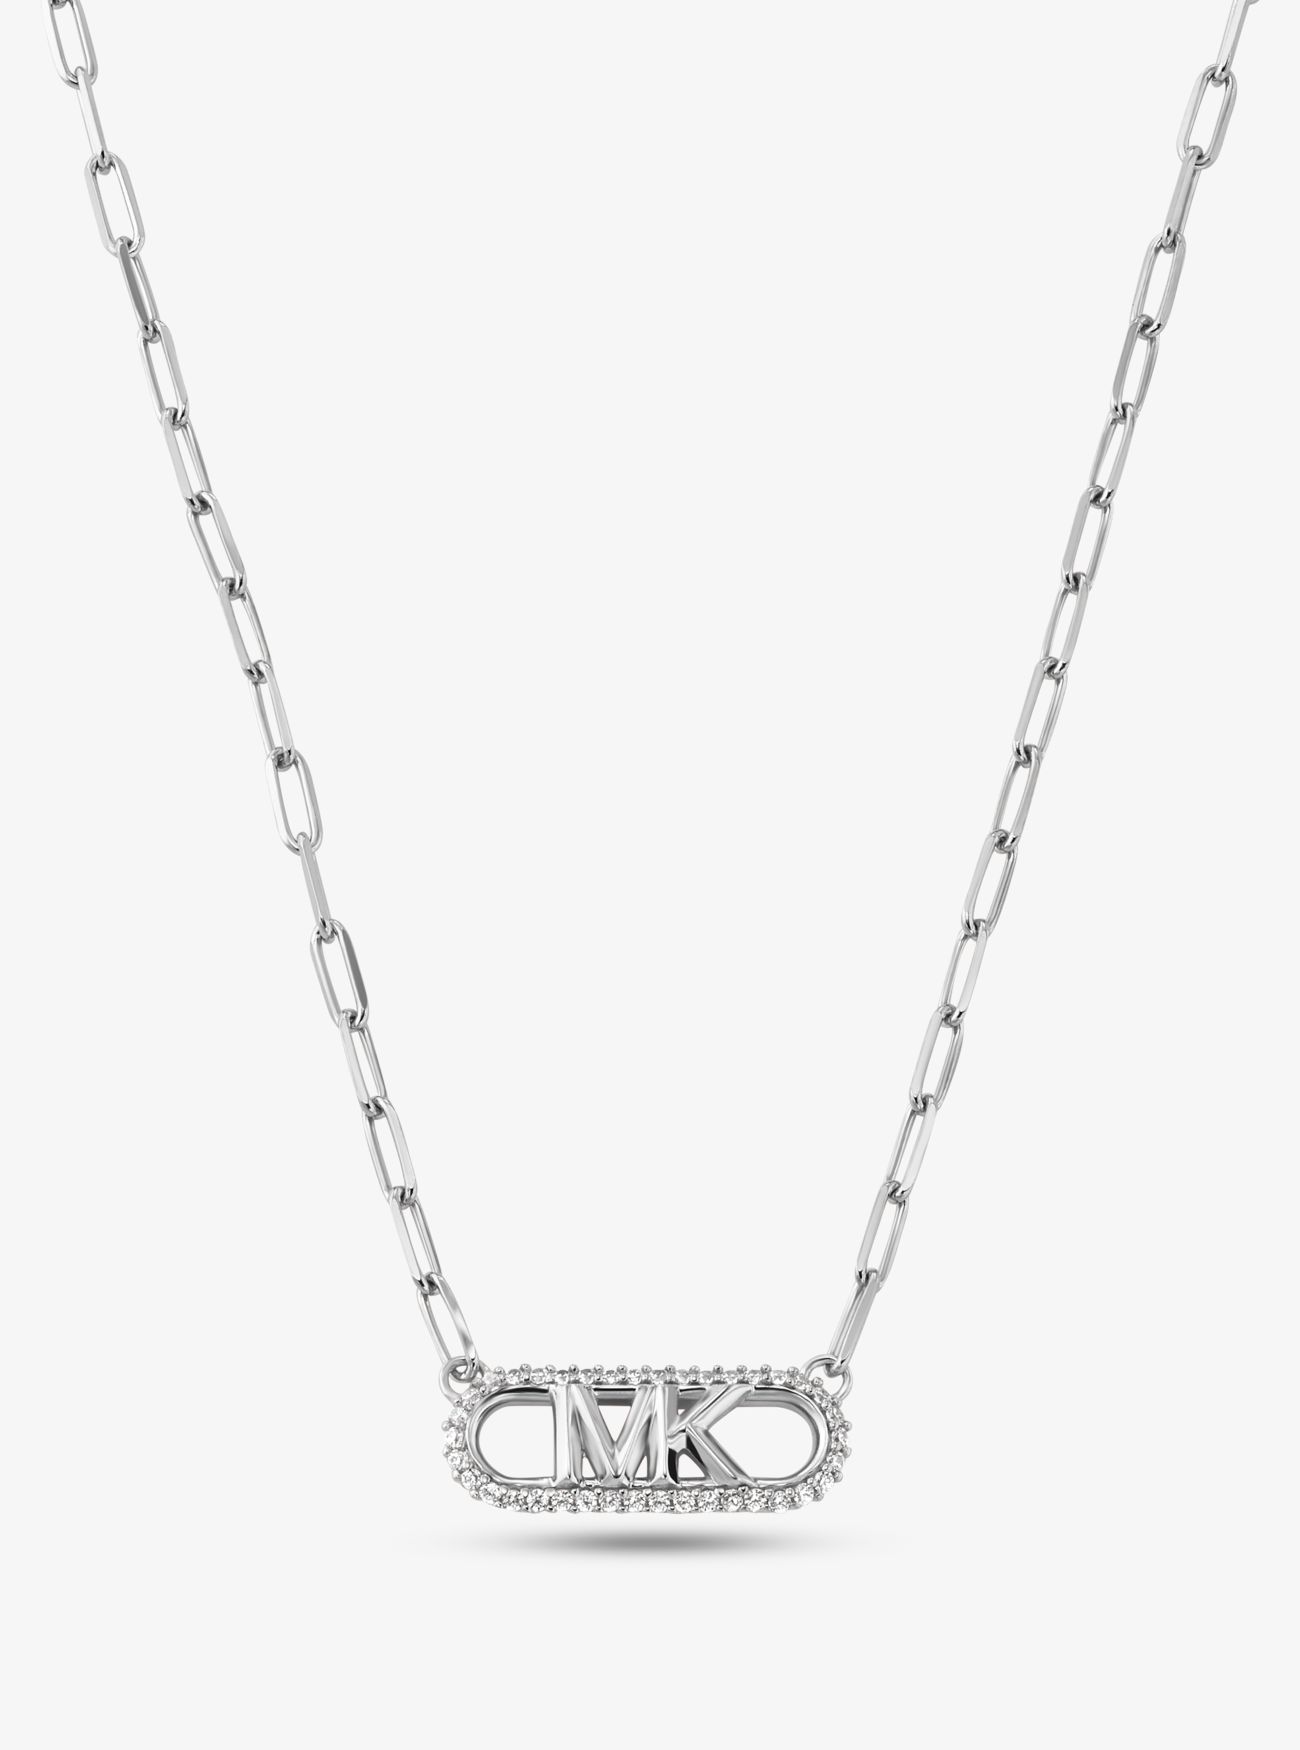 MK Precious Metal-Plated Sterling Silver Empire Logo Chain Link Necklace - Silver - Michael Kors